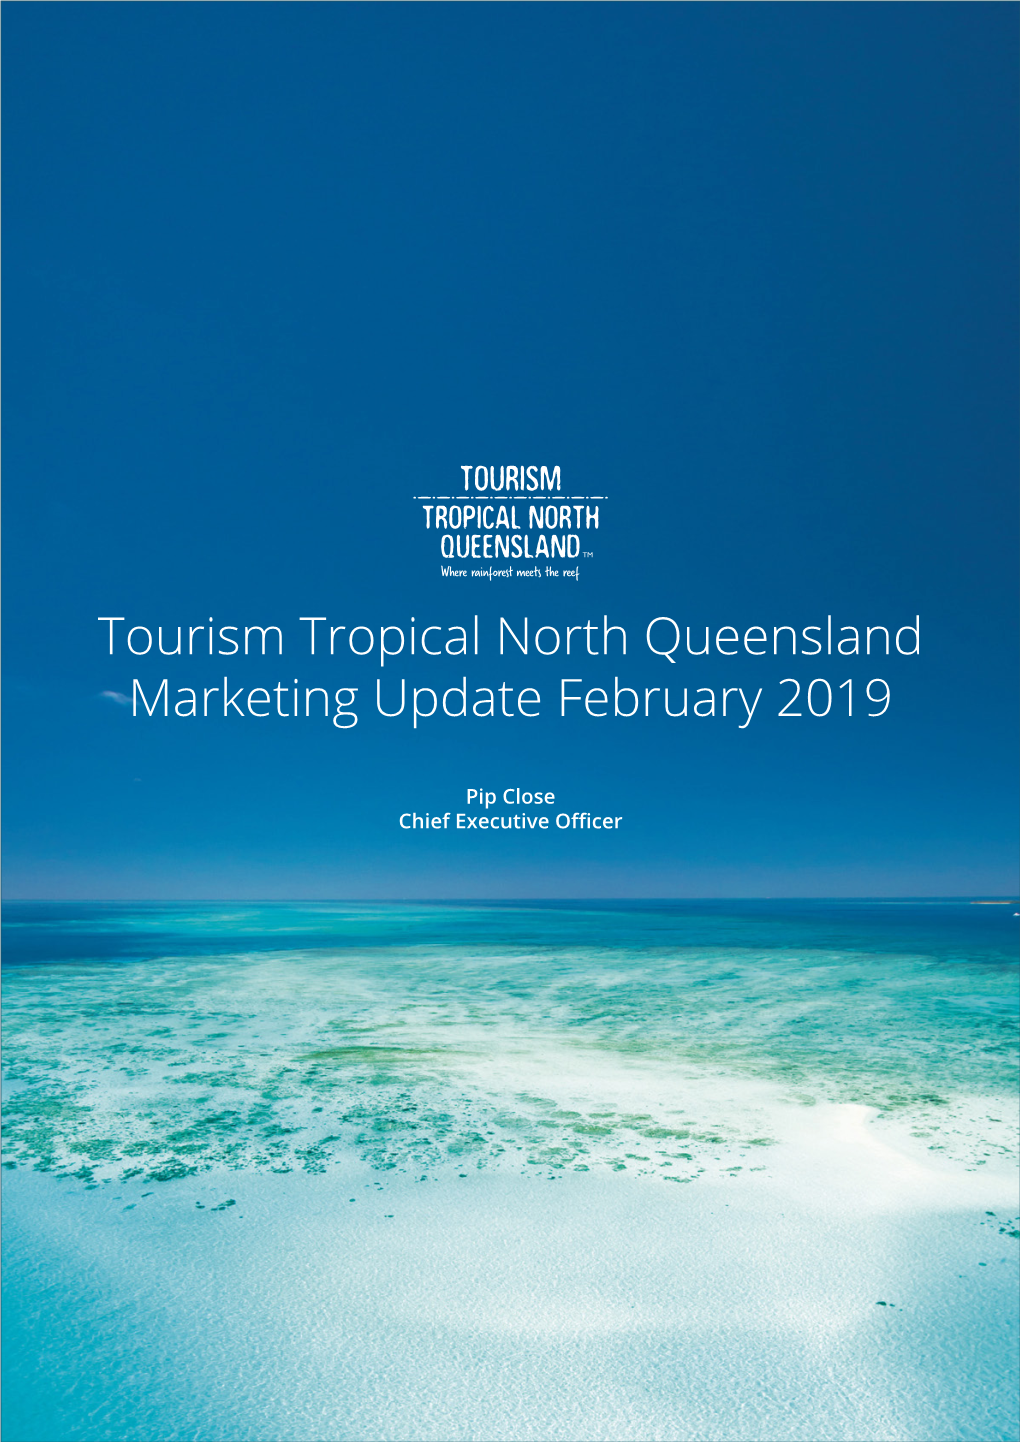 Tourism Tropical North Queensland Marketing Update February 2019